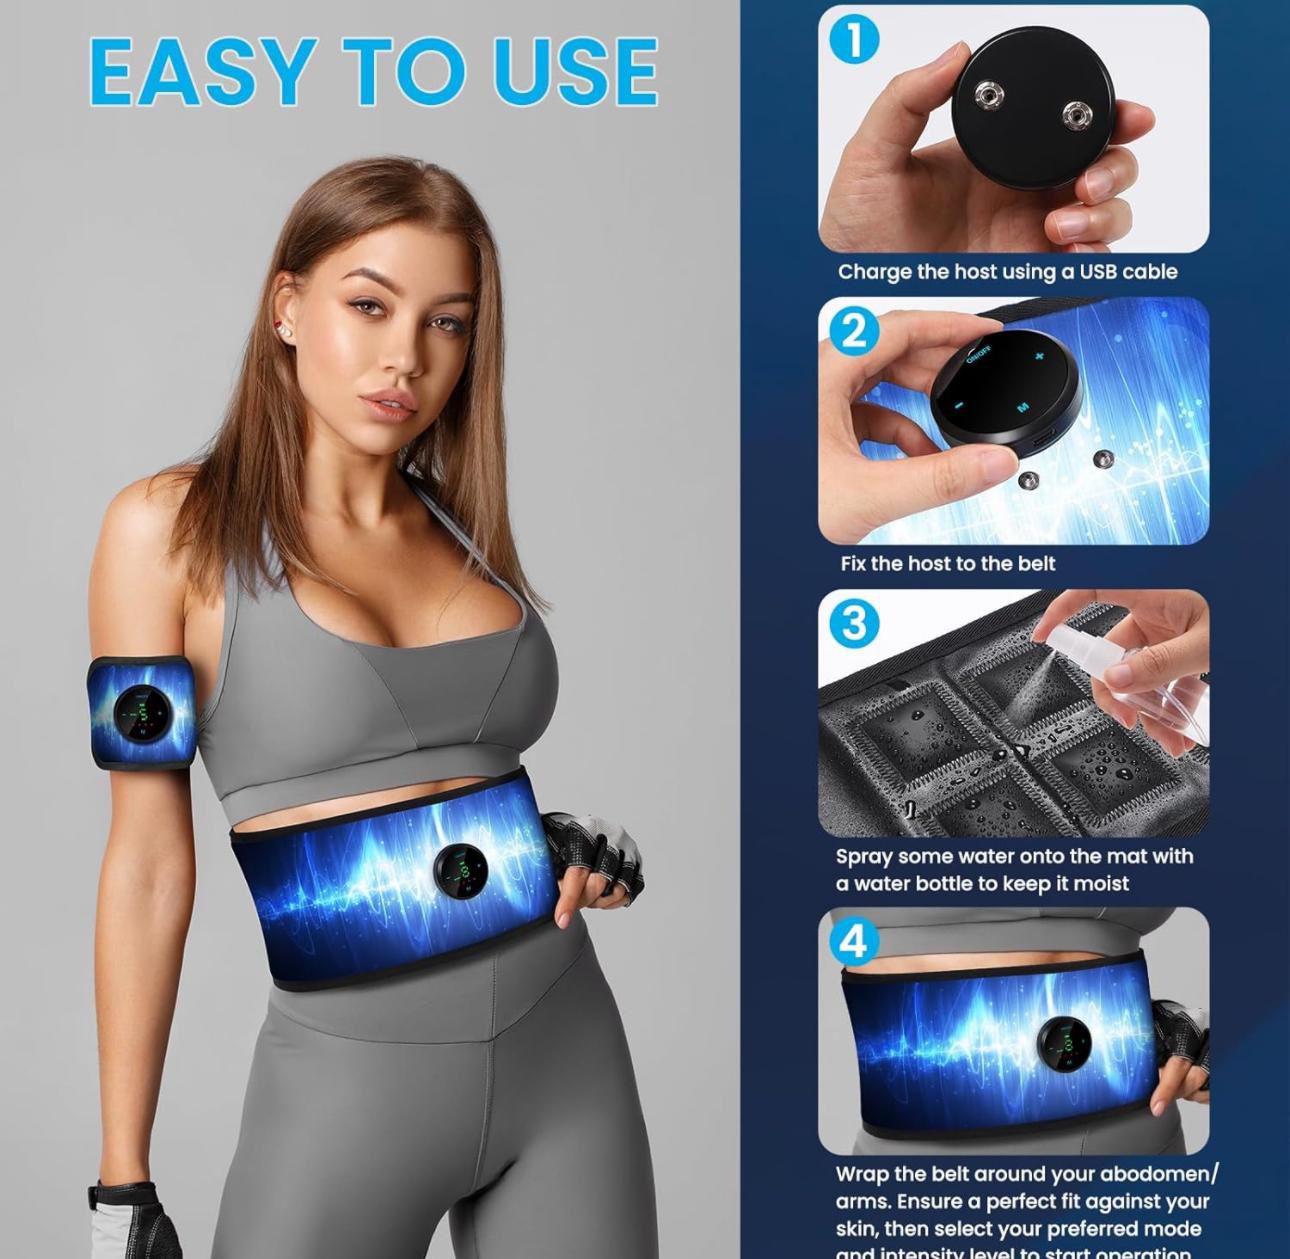 ABS Stimulator, Muscle Machine Workout Equipment, Ab Toning Belt Muscle Toner Fitness Training for Abdomen/Arm/Leg, Ab Trainer for Home Body Shape